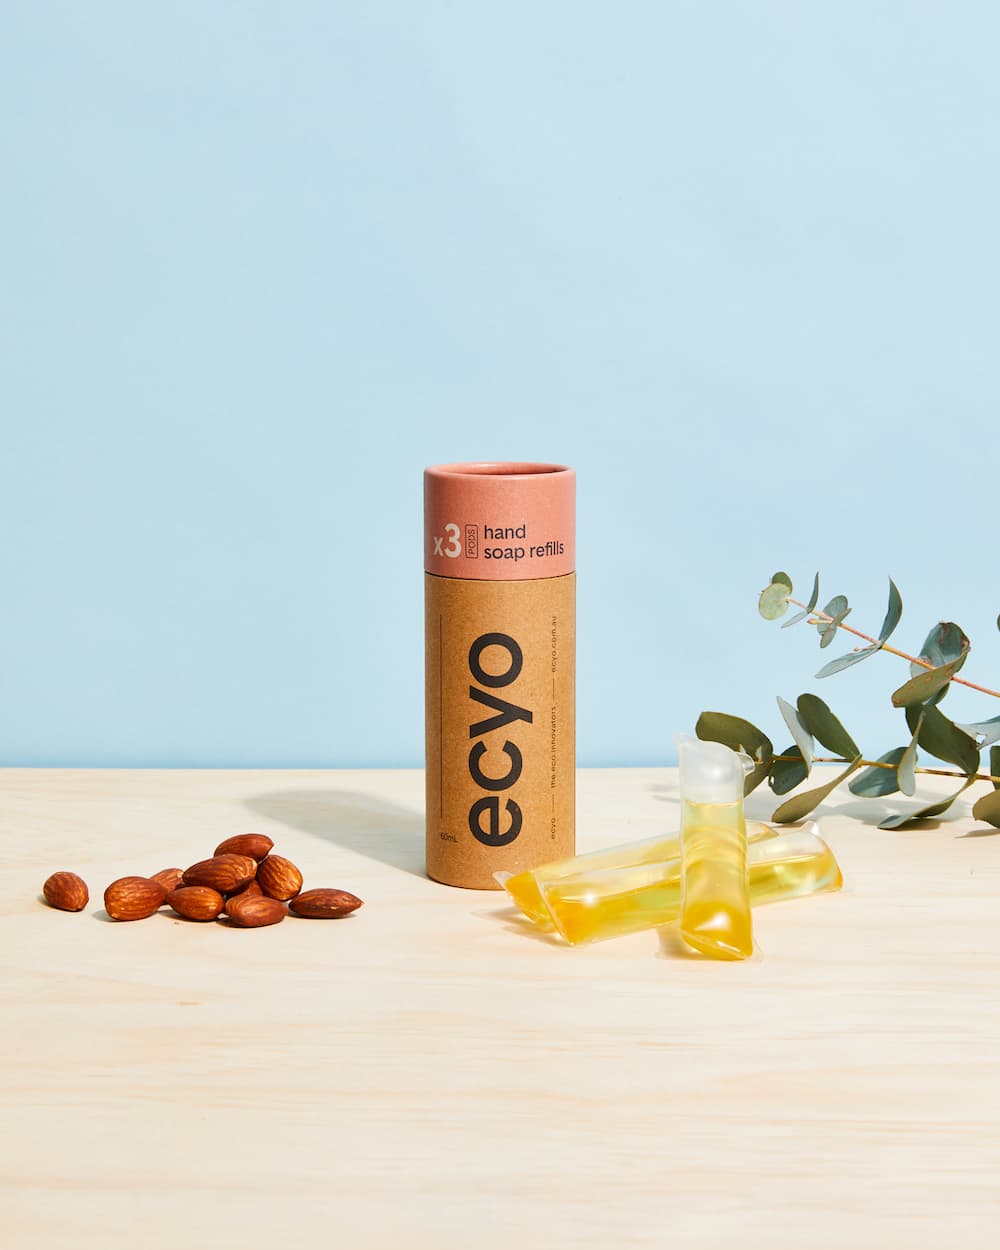 ecyo hand soap refills cylinder packaging with three refills and almonds and greenery